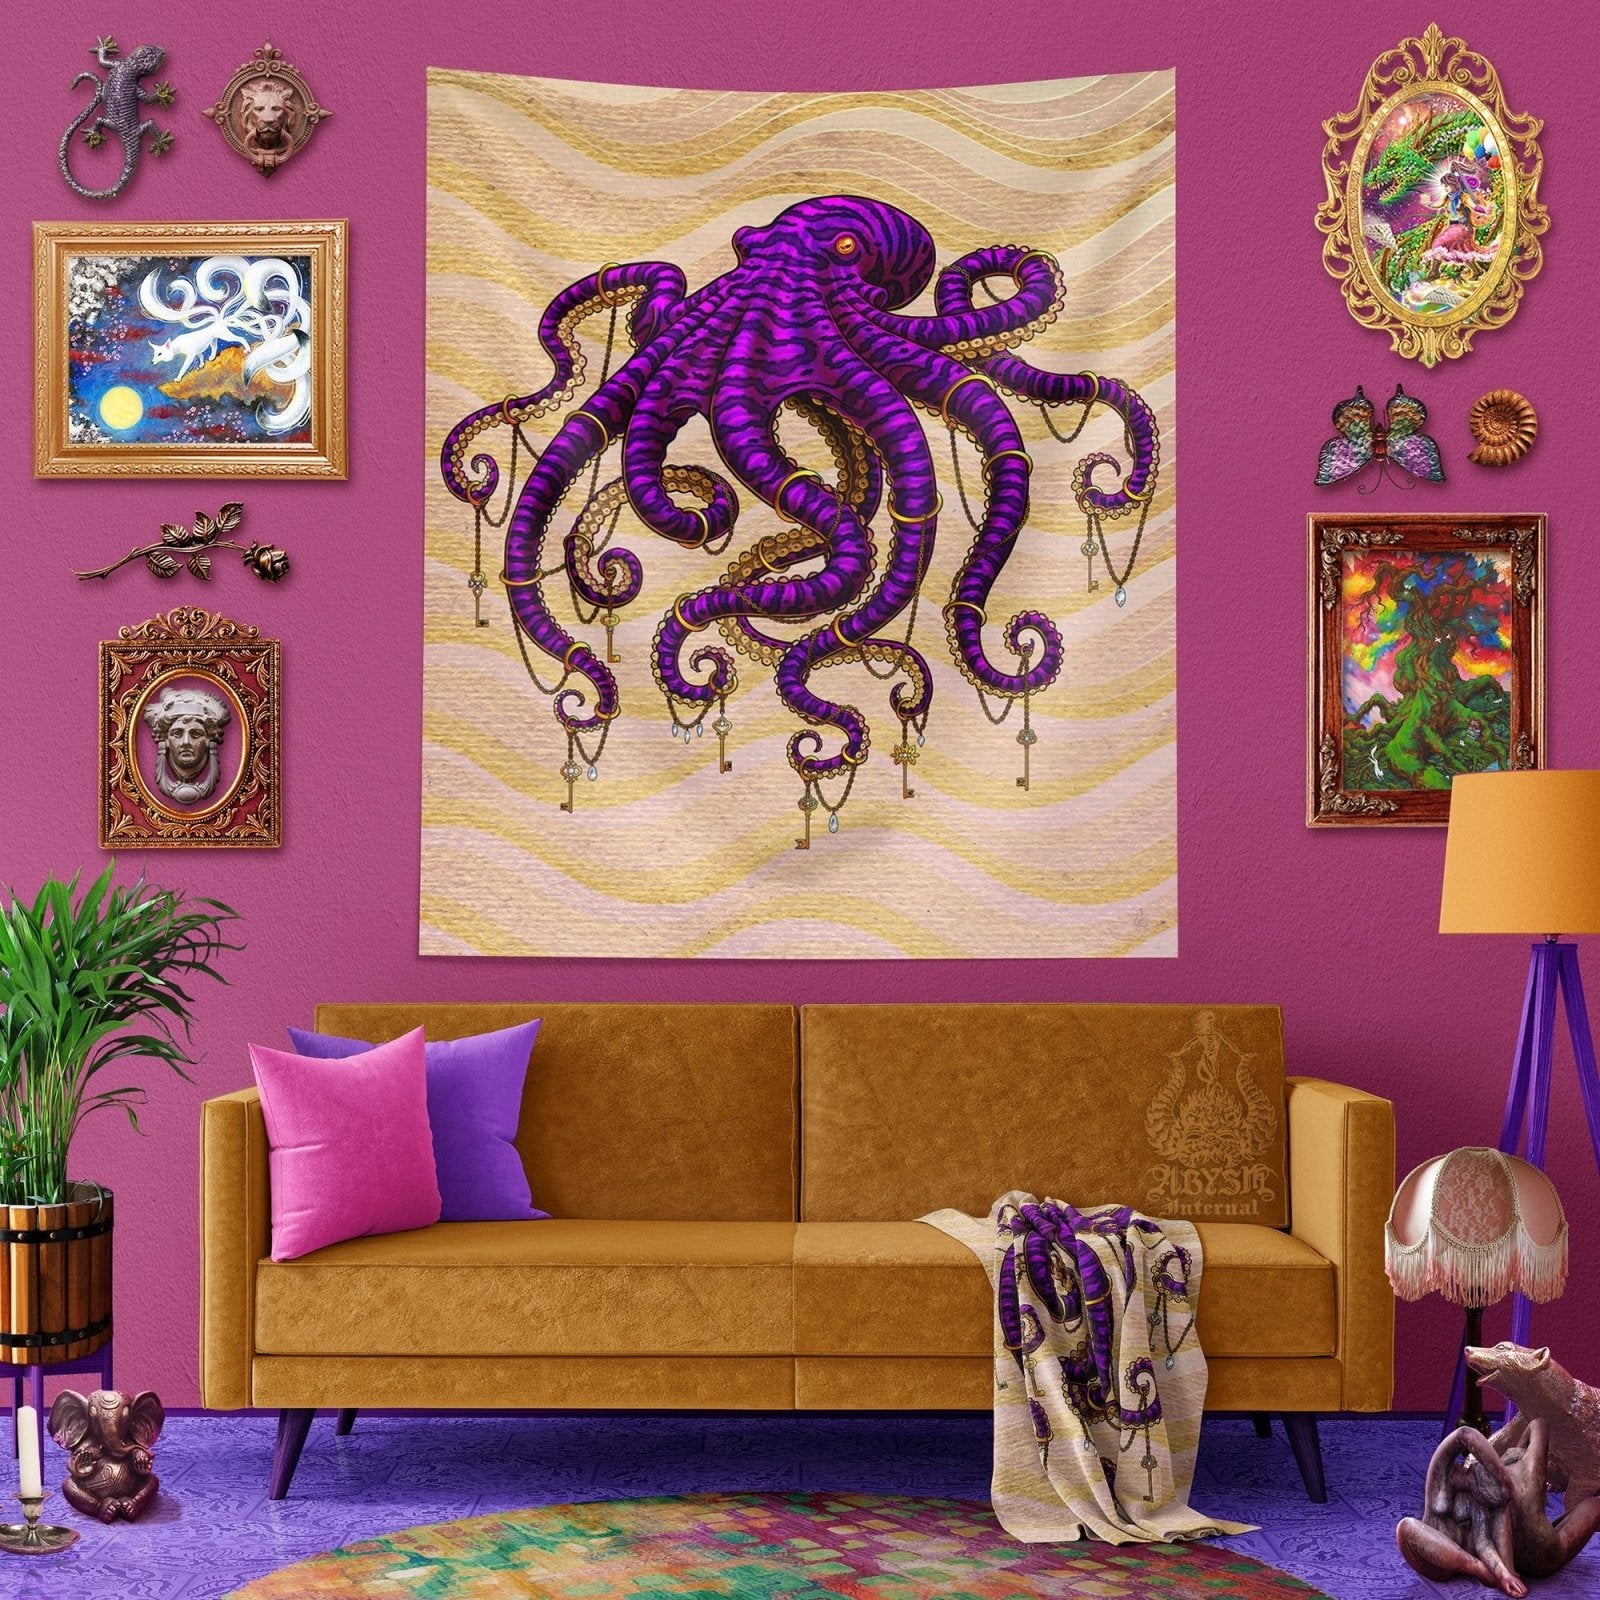 Beach Tapestry, Octopus Wall Hanging, Ocean and Coastal Home Decor, Art Print, Eclectic and Funky - Purple & Sand - Abysm Internal